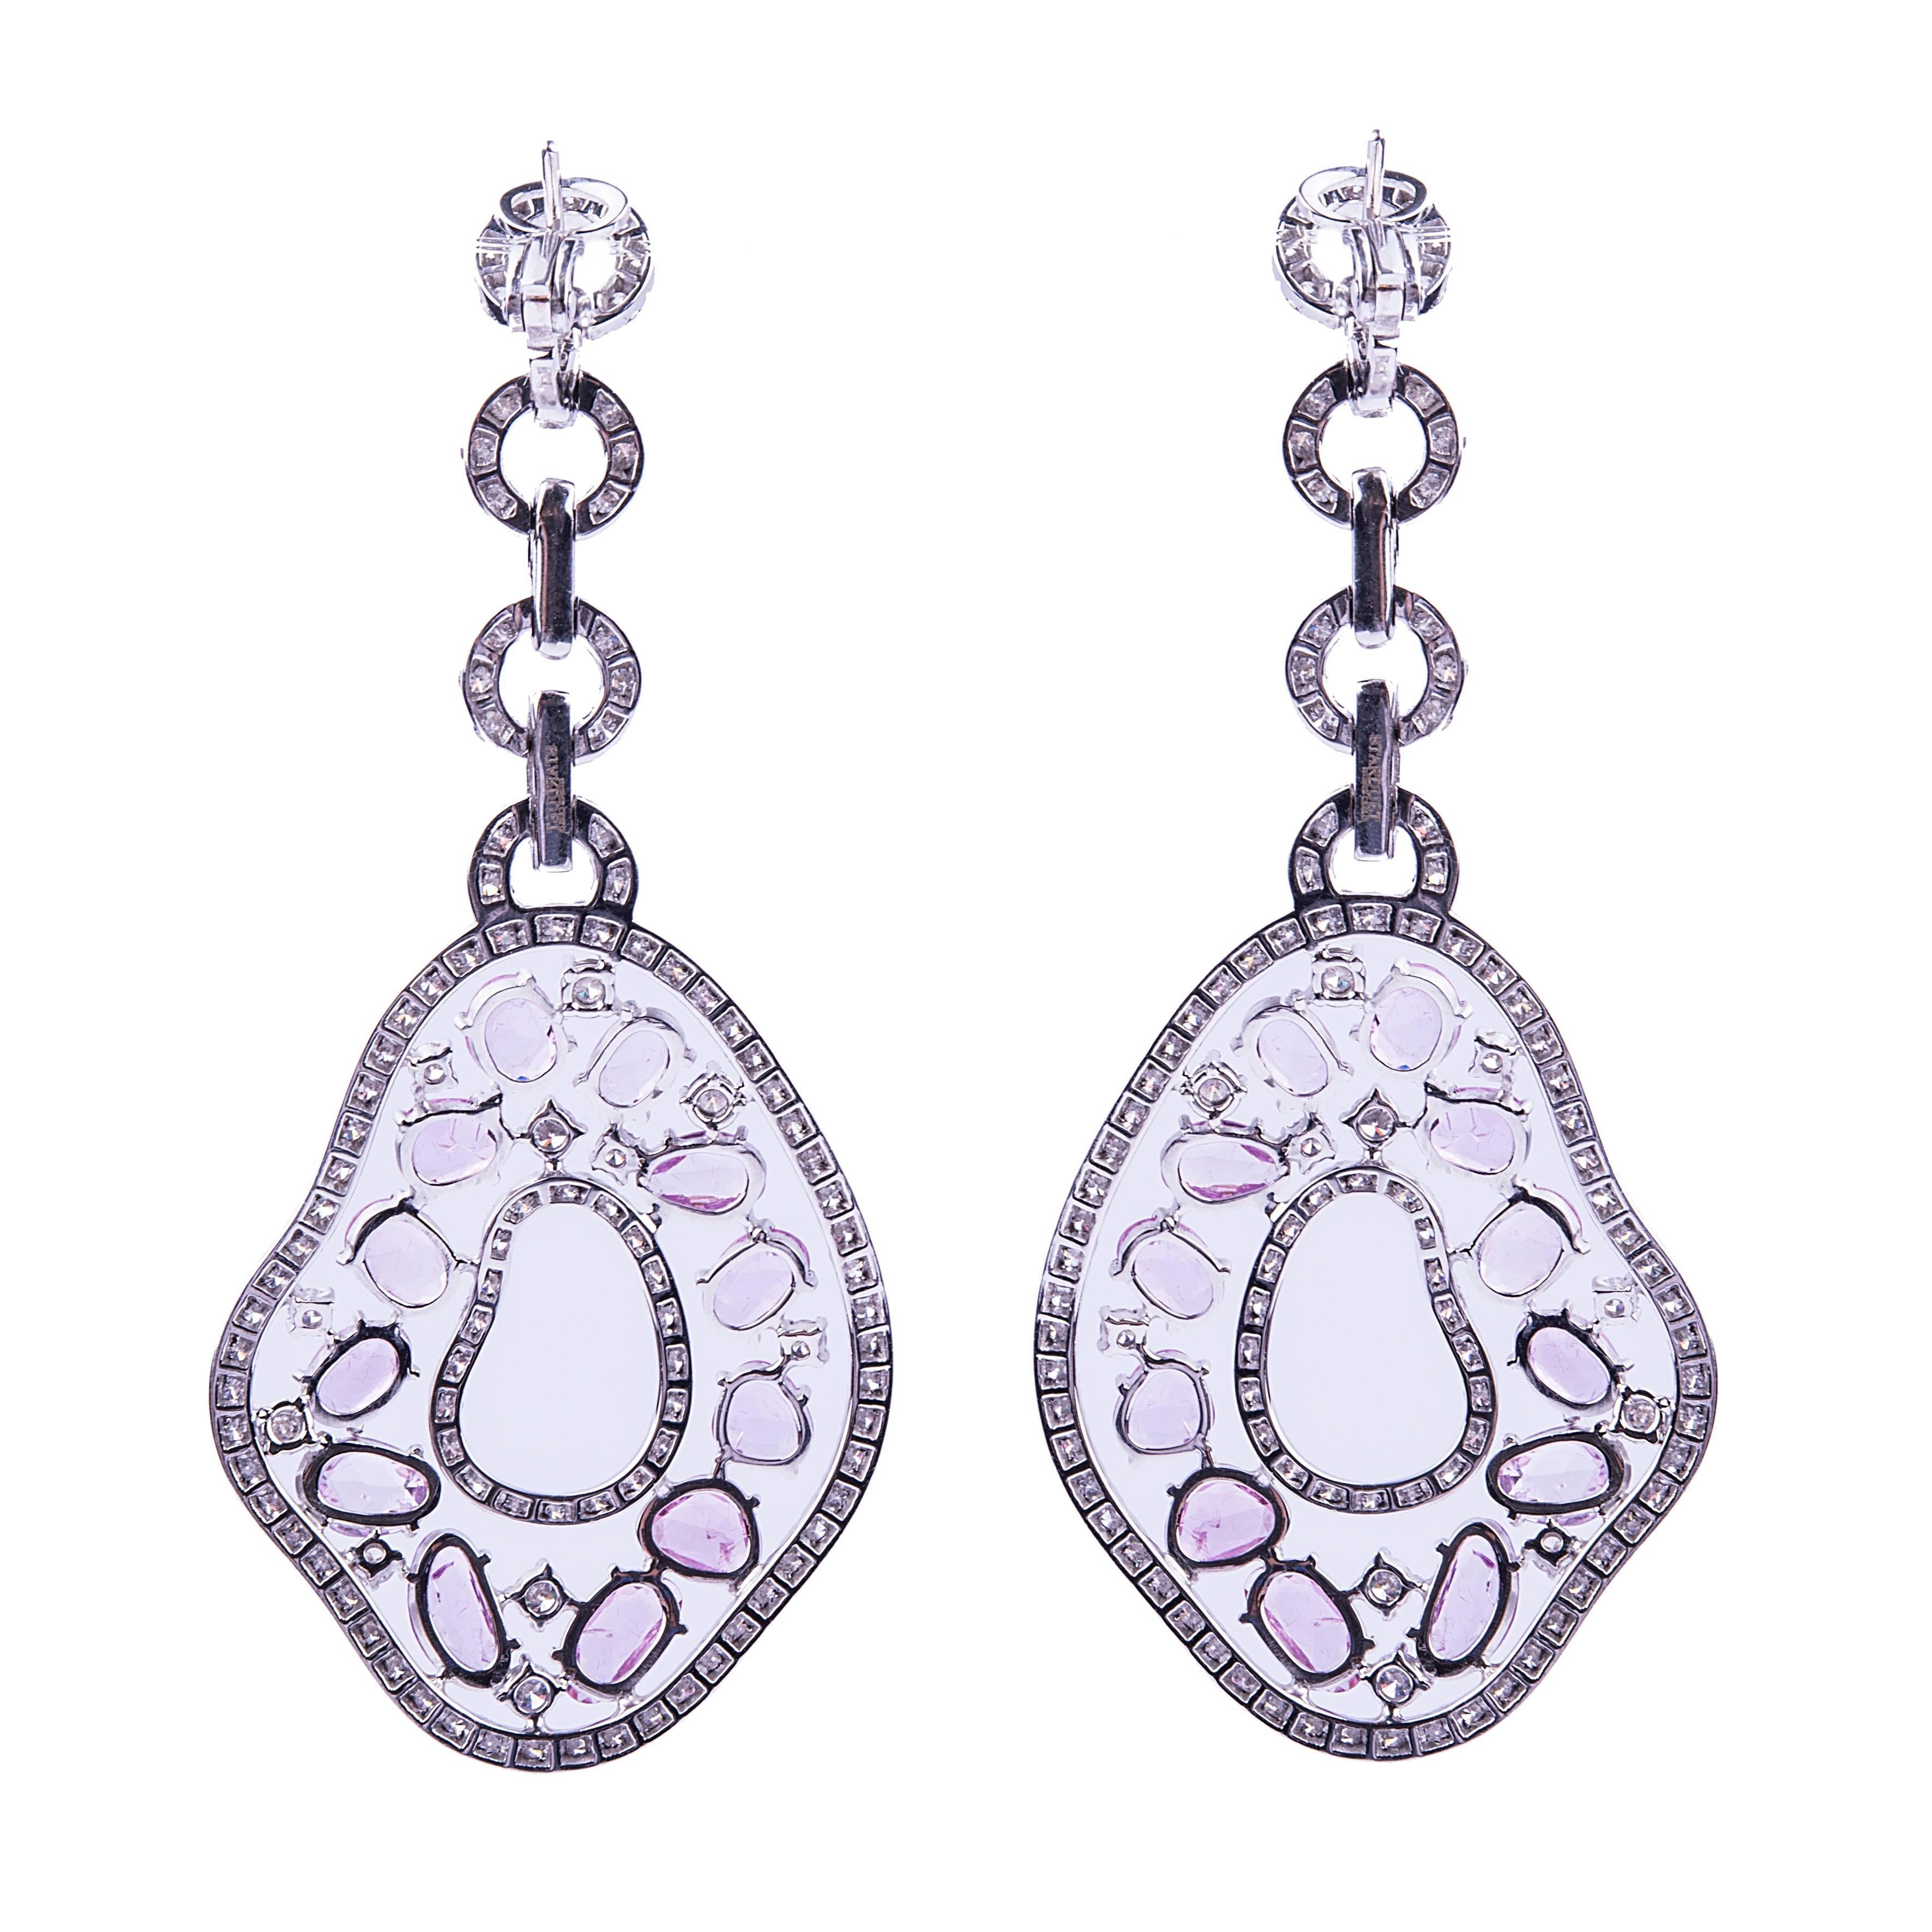 A raffinate pair of pink sapphire and diamond pendant earrings featuring 12 ct circa of pink sapphires and 5.50 ct circa of G color VS diamonds.